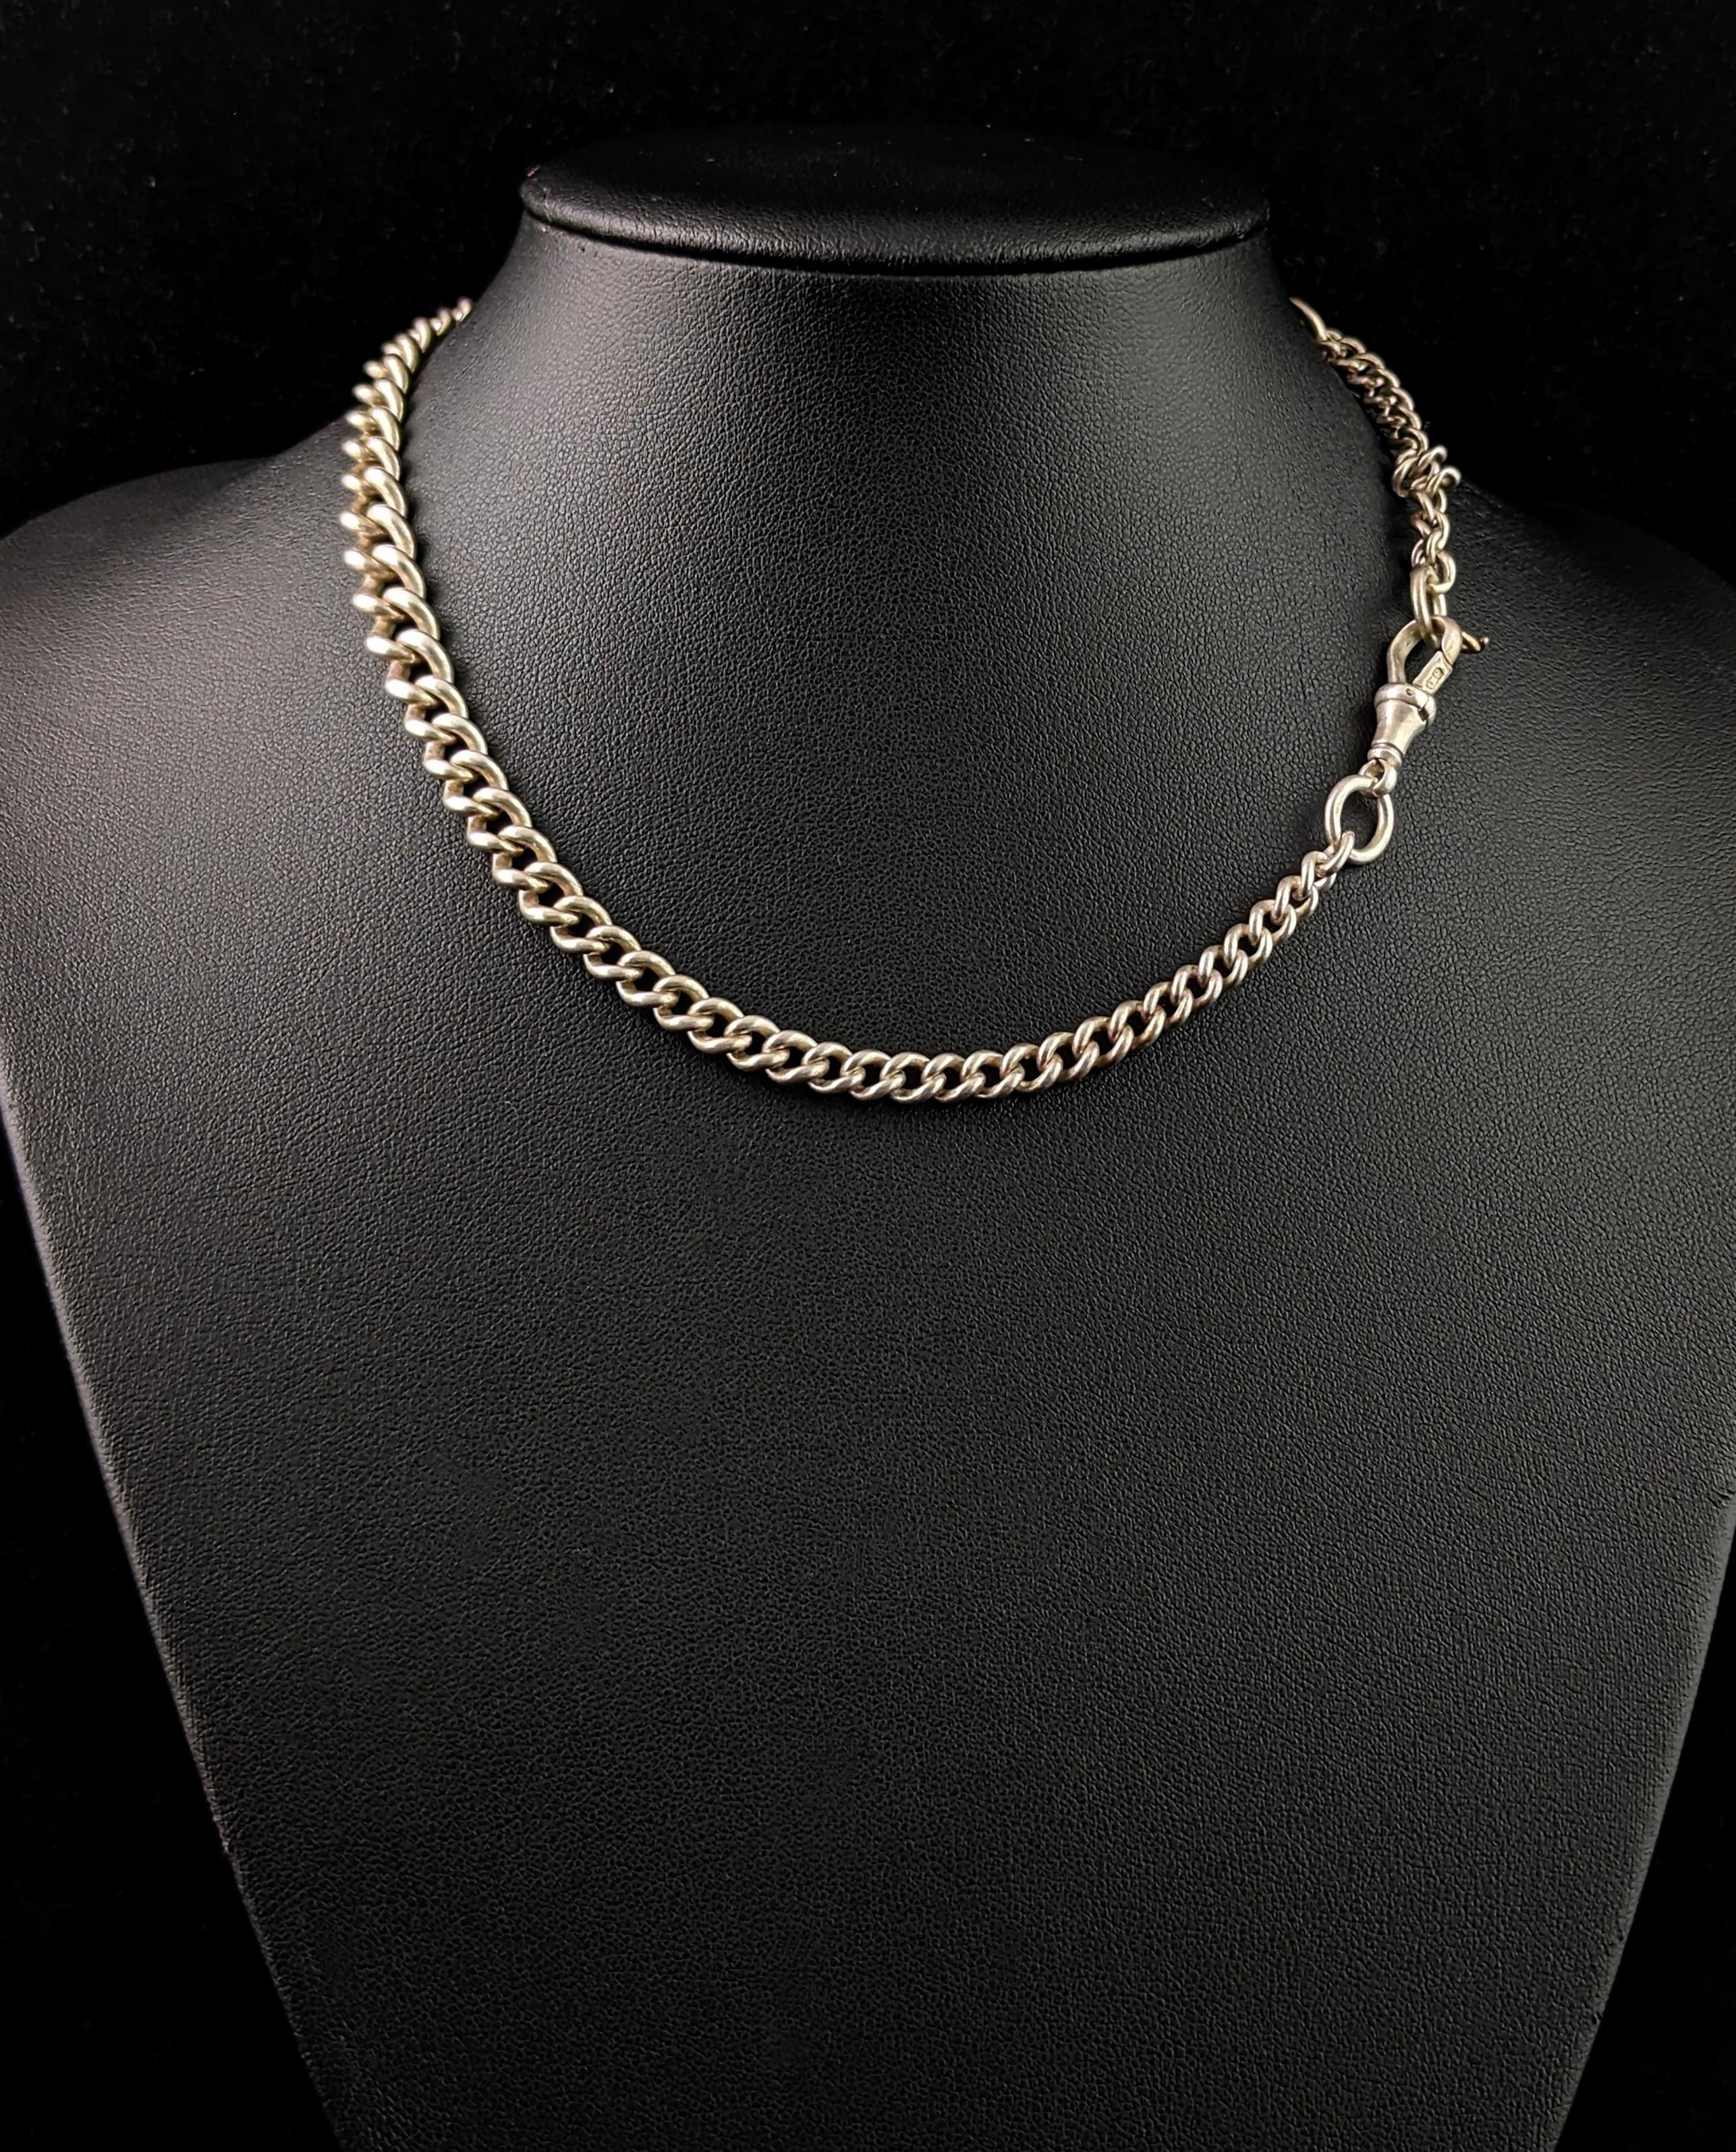 An attractive antique, Edwardian era sterling silver Albert chain or watch chain.

Nice chunky silver, graduated curb links with a silver dog clip fastener to one end and a silver jump ring to the other.

The chain is made from sterling silver and